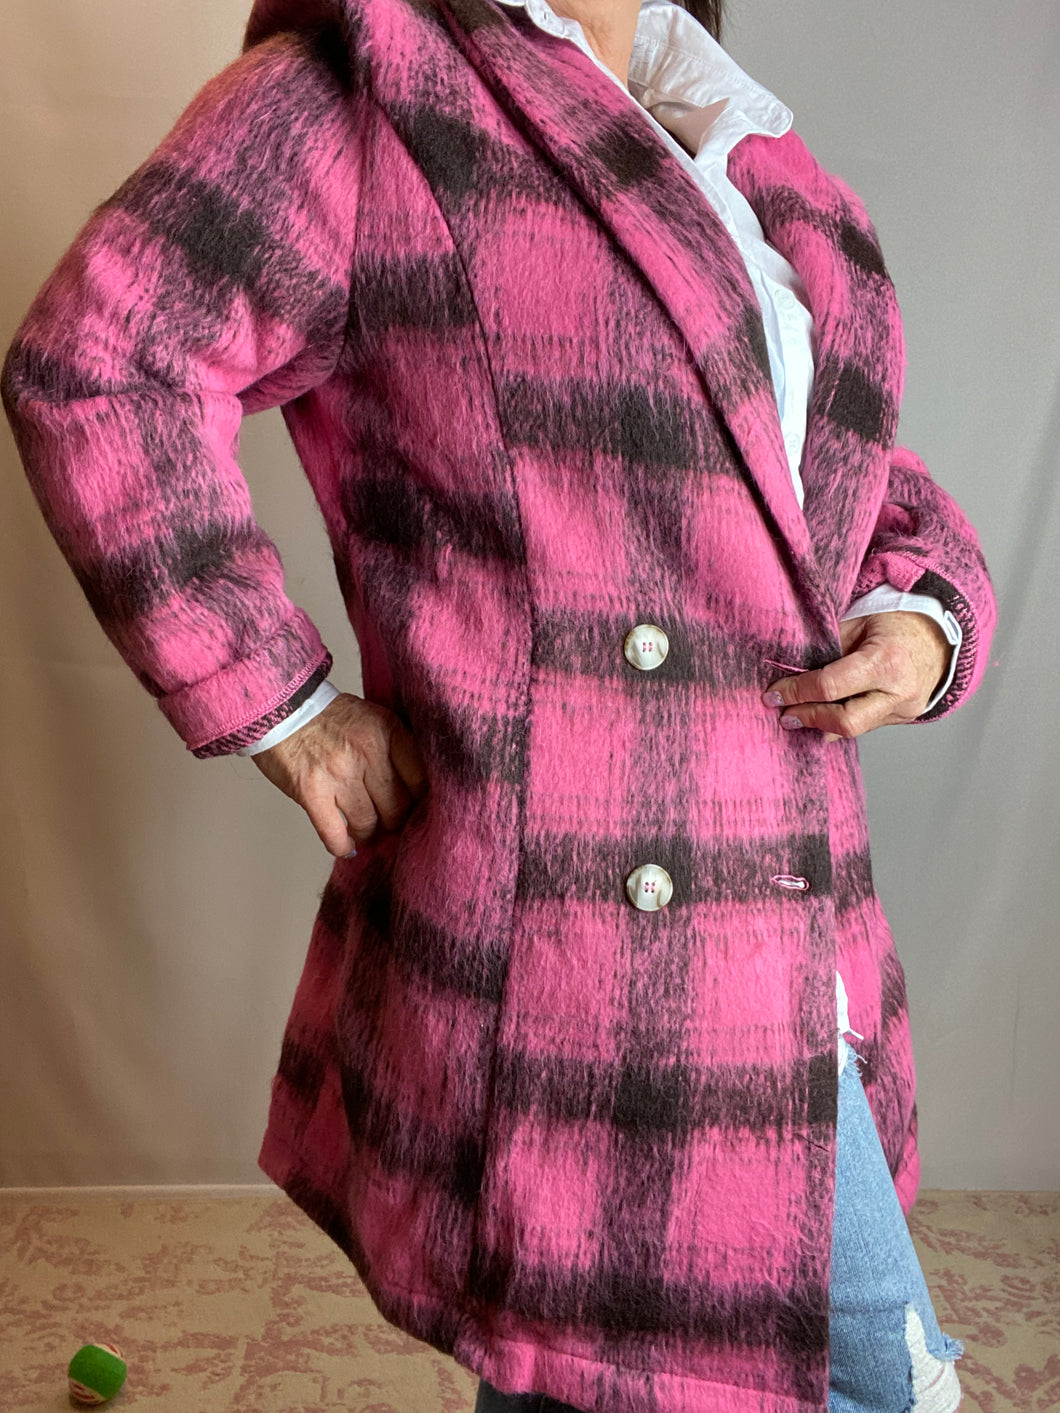 The Pink Evelyn Jacket